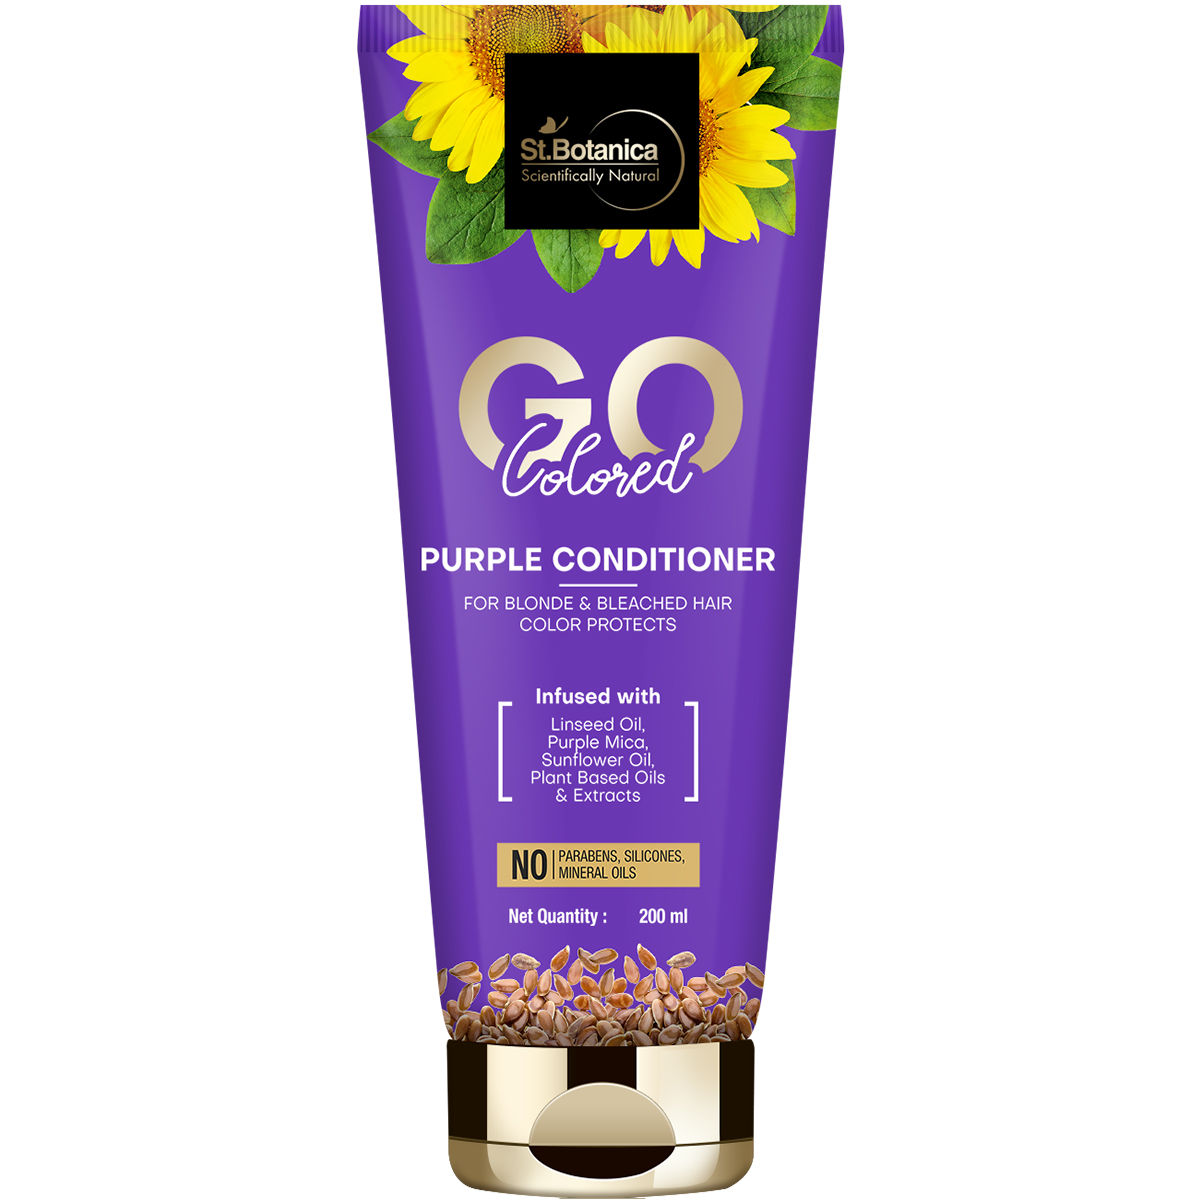 StBotanica GO Colored Purple Hair Conditioner - With Linseed, Purple Mica, No Silicone